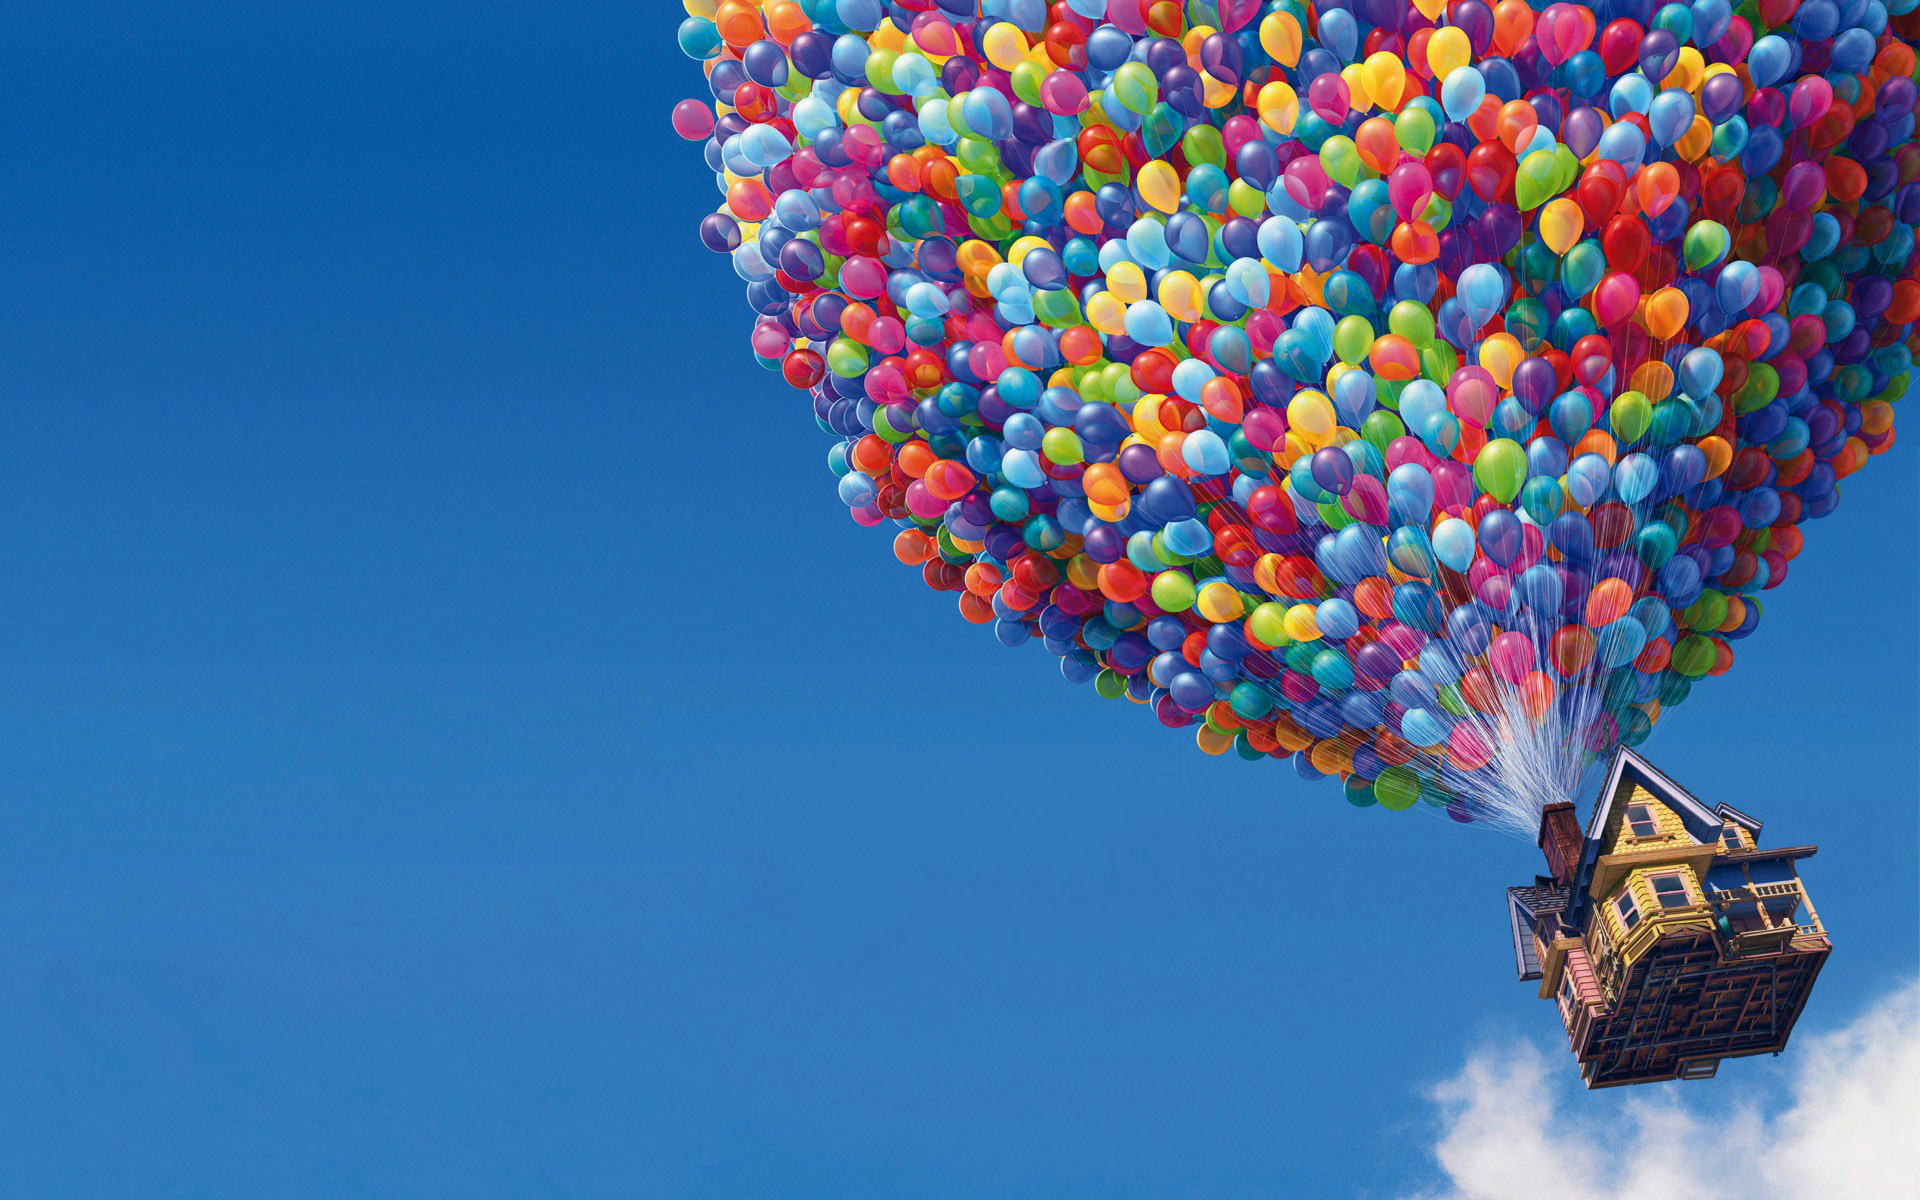 UP Movie Balloons House Wallpapers HD Wallpapers